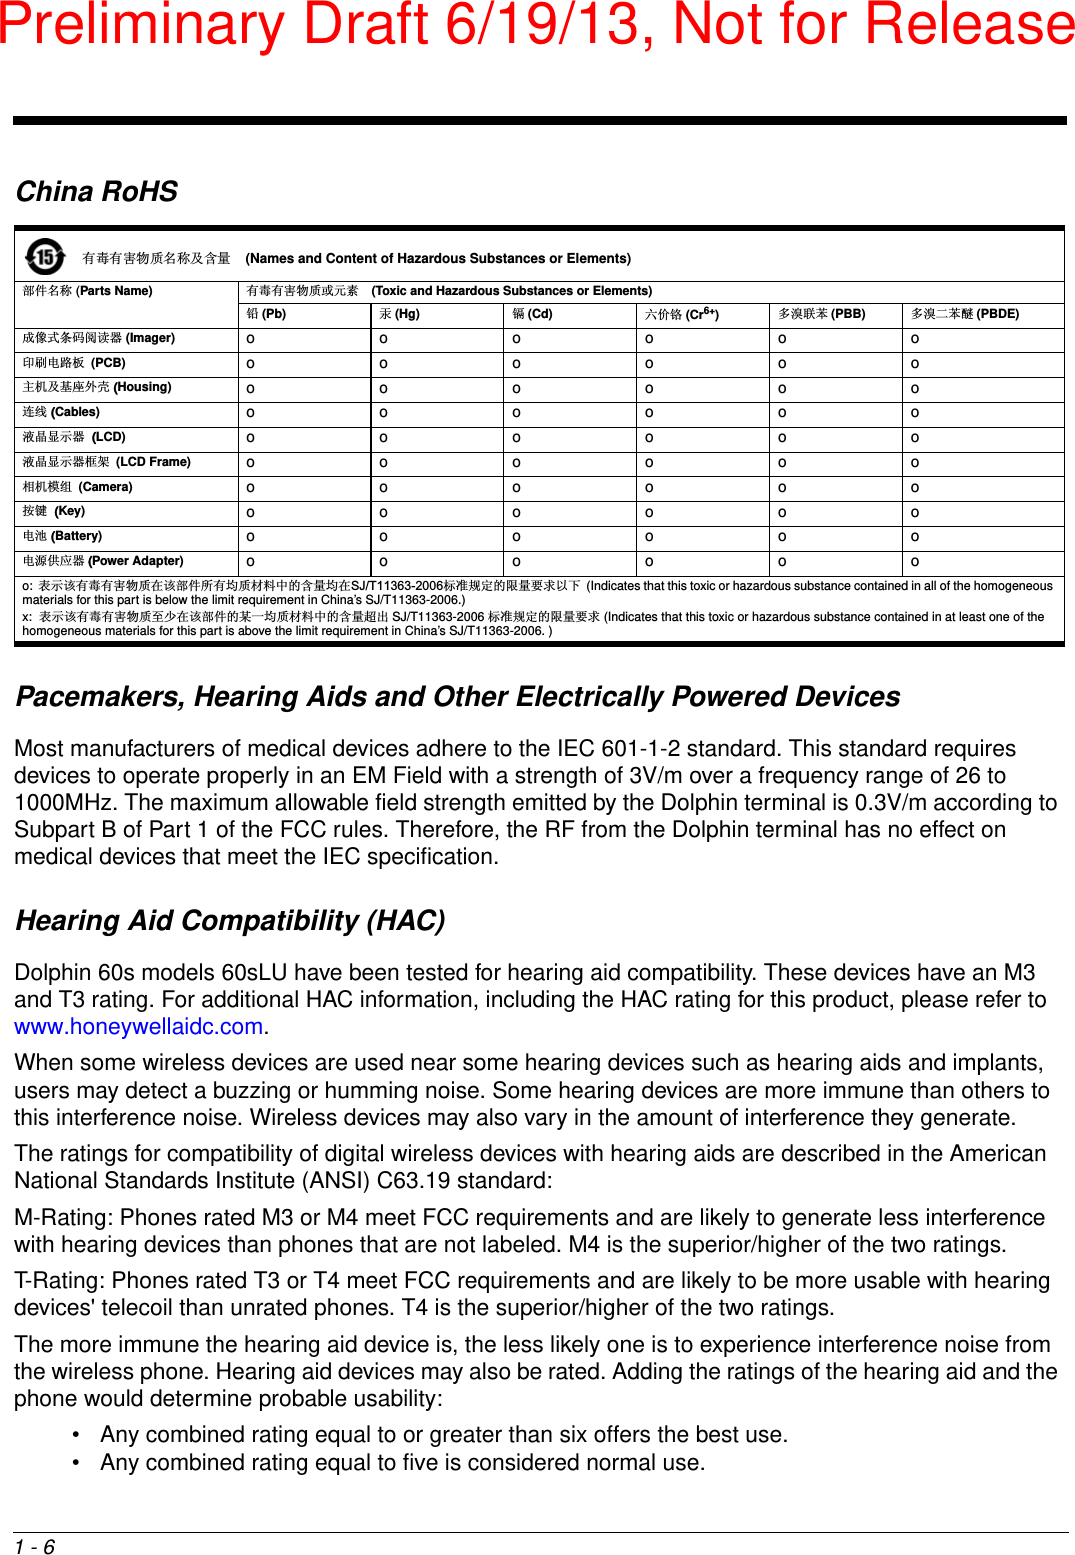 1 - 6China RoHSPacemakers, Hearing Aids and Other Electrically Powered DevicesMost manufacturers of medical devices adhere to the IEC 601-1-2 standard. This standard requires devices to operate properly in an EM Field with a strength of 3V/m over a frequency range of 26 to 1000MHz. The maximum allowable field strength emitted by the Dolphin terminal is 0.3V/m according to Subpart B of Part 1 of the FCC rules. Therefore, the RF from the Dolphin terminal has no effect on medical devices that meet the IEC specification.Hearing Aid Compatibility (HAC)Dolphin 60s models 60sLU have been tested for hearing aid compatibility. These devices have an M3 and T3 rating. For additional HAC information, including the HAC rating for this product, please refer to www.honeywellaidc.com.When some wireless devices are used near some hearing devices such as hearing aids and implants, users may detect a buzzing or humming noise. Some hearing devices are more immune than others to this interference noise. Wireless devices may also vary in the amount of interference they generate. The ratings for compatibility of digital wireless devices with hearing aids are described in the American National Standards Institute (ANSI) C63.19 standard:M-Rating: Phones rated M3 or M4 meet FCC requirements and are likely to generate less interference with hearing devices than phones that are not labeled. M4 is the superior/higher of the two ratings.T-Rating: Phones rated T3 or T4 meet FCC requirements and are likely to be more usable with hearing devices&apos; telecoil than unrated phones. T4 is the superior/higher of the two ratings.The more immune the hearing aid device is, the less likely one is to experience interference noise from the wireless phone. Hearing aid devices may also be rated. Adding the ratings of the hearing aid and the phone would determine probable usability:• Any combined rating equal to or greater than six offers the best use.• Any combined rating equal to five is considered normal use.  有毒有害物质名称及含量  (Names and Content of Hazardous Substances or Elements)部件名称 (Parts Name) 有毒有害物质或元素  (Toxic and Hazardous Substances or Elements)铅(Pb) 汞(Hg) 镉(Cd) 六价铬 (Cr6+)多溴联苯 (PBB) 多溴二苯醚 (PBDE)成像式条码阅读器 (Imager) oooooo印刷电路板 (PCB) oooooo主机及基座外壳 (Housing) oooooo连线 (Cables) oooooo液晶显示器  (LCD) oooooo液晶显示器框架 (LCD Frame) oooooo相机模组 (Camera) oooooo按键  (Key) oooooo电池 (Battery) oooooo电源供应器 (Power Adapter) ooooooo: 表示该有毒有害物质在该部件所有均质材料中的含量均在SJ/T11363-2006标准规定的限量要求以下 (Indicates that this toxic or hazardous substance contained in all of the homogeneous materials for this part is below the limit requirement in China’s SJ/T11363-2006.)x:  表示该有毒有害物质至少在该部件的某一均质材料中的含量超出 SJ/T11363-2006 标准规定的限量要求 (Indicates that this toxic or hazardous substance contained in at least one of the homogeneous materials for this part is above the limit requirement in China’s SJ/T11363-2006. )Preliminary Draft 6/19/13, Not for Release